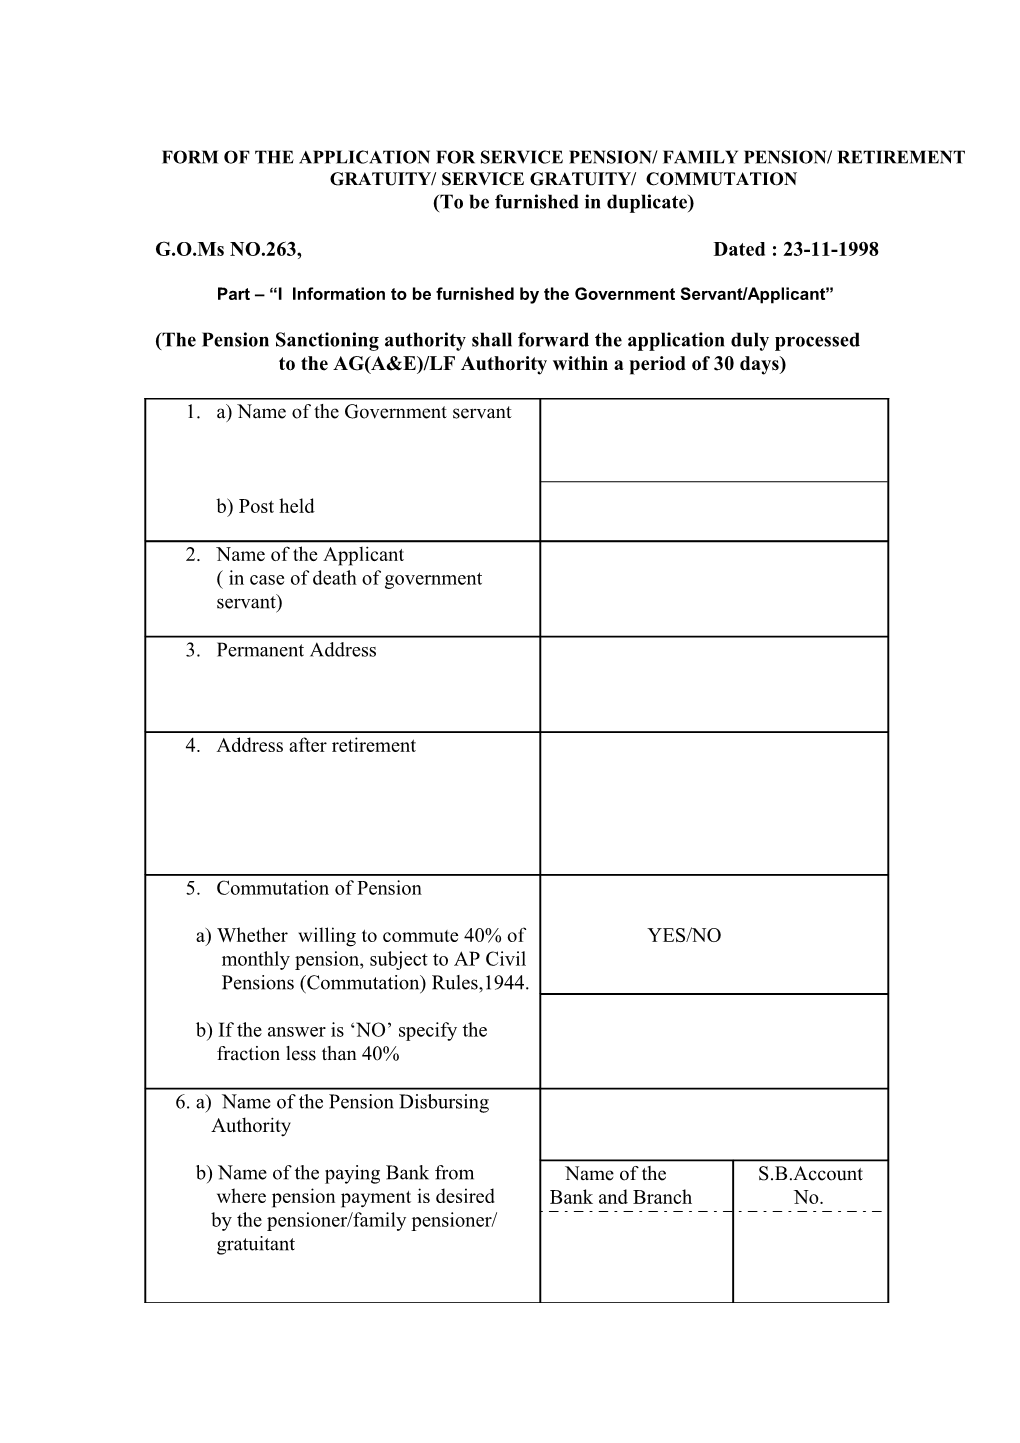 Form of the Application for Service Pension/ Family Pension/ Retirement Gratuity/ Service